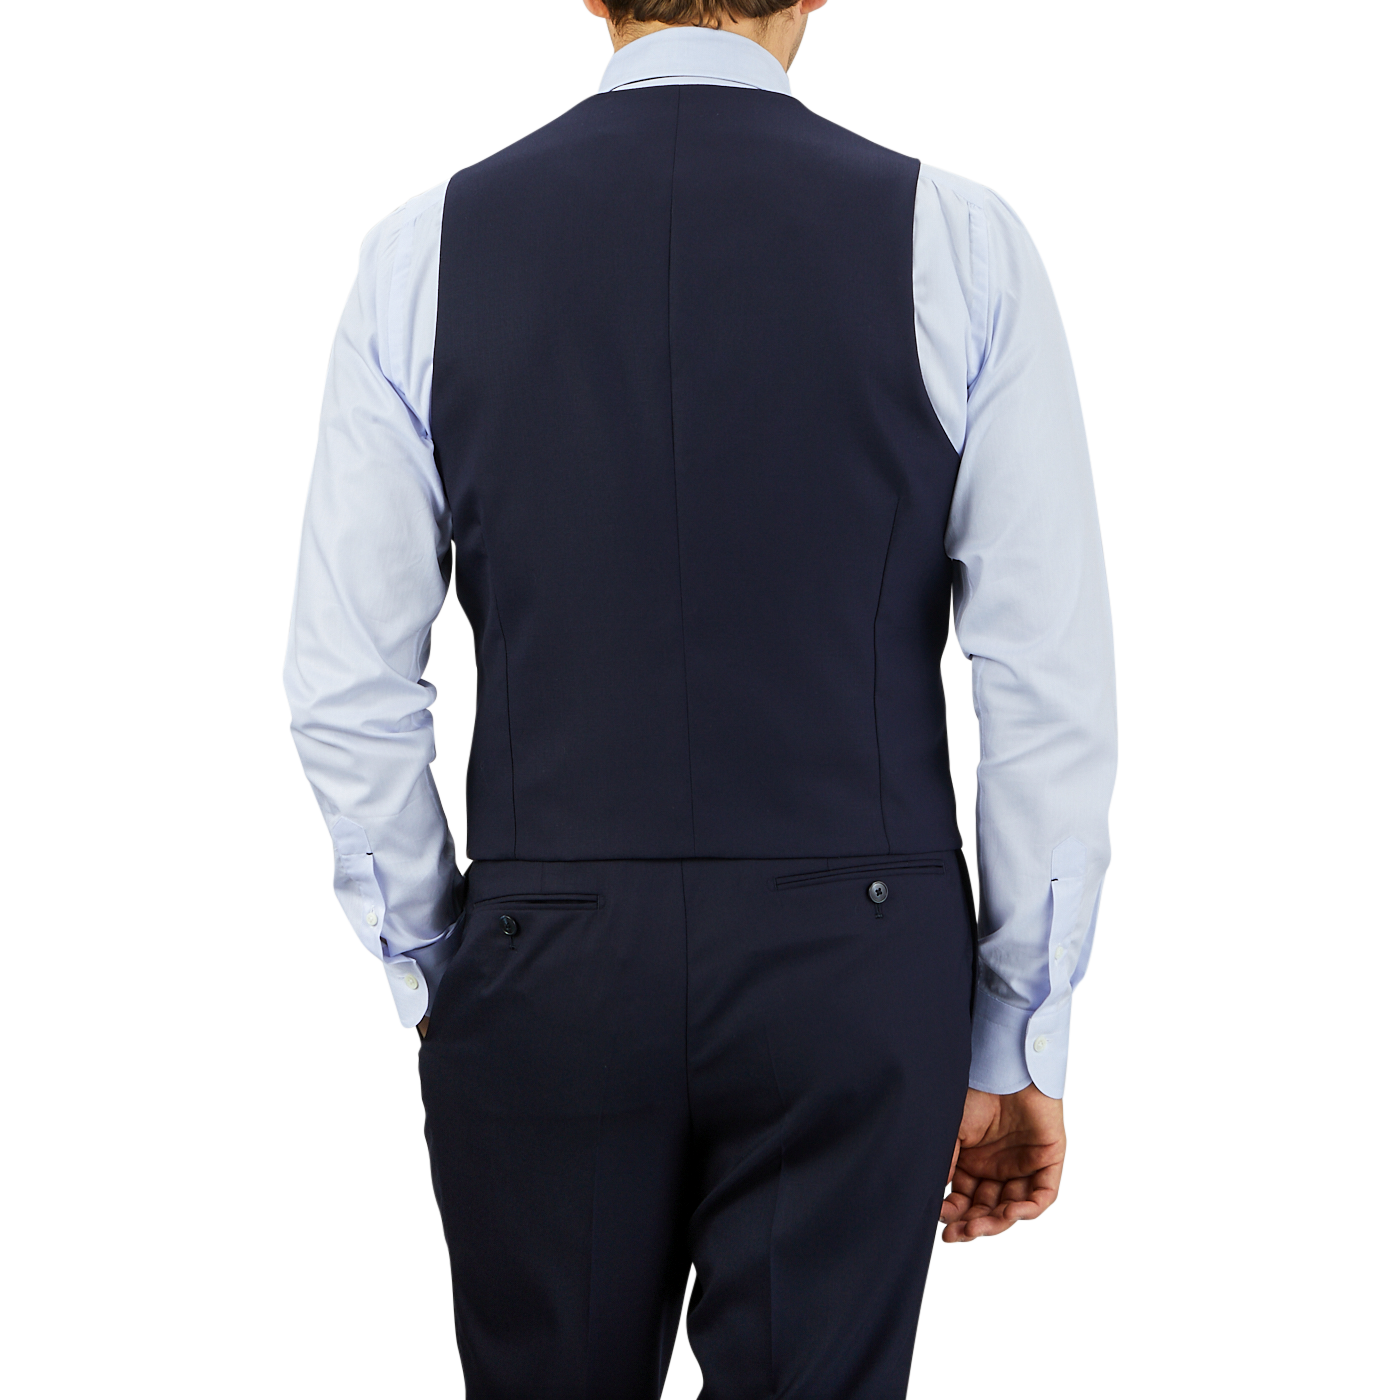 A man viewed from behind wearing a Baltzar Sartorial Navy Super 100s Wool DB Waistcoat and matching trousers with a light blue shirt, standing against a gray background.